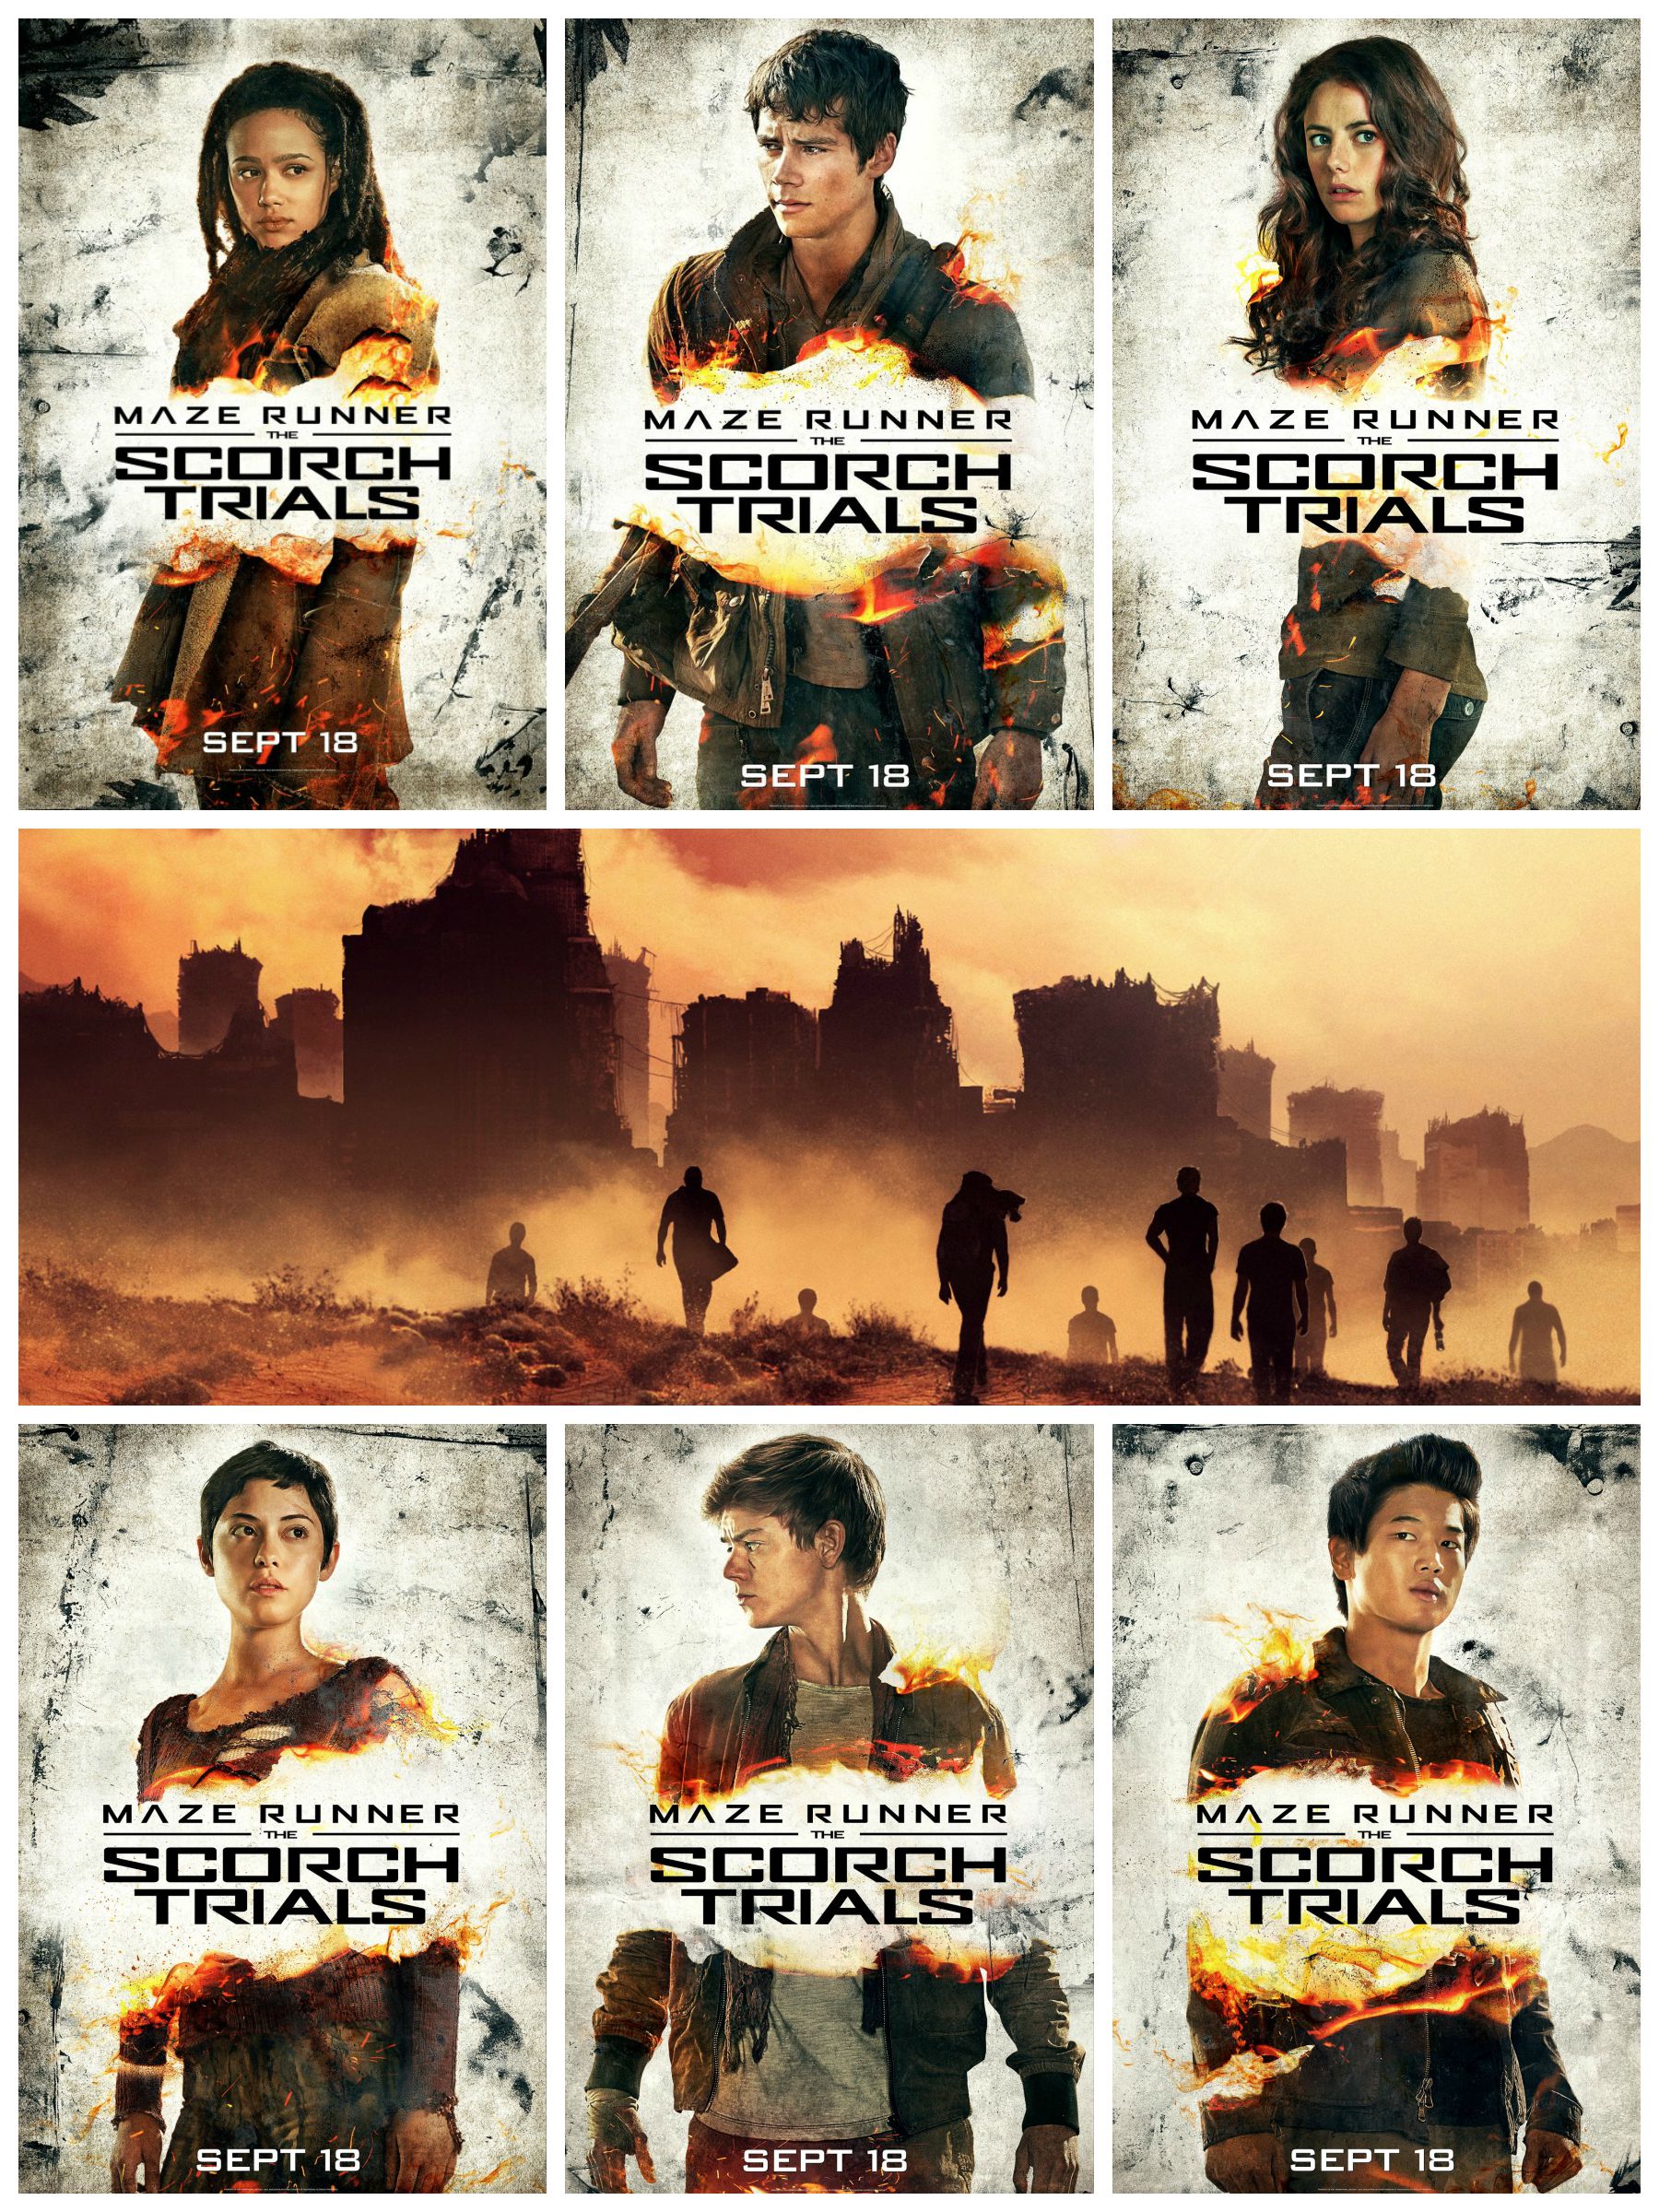 Watch Dylan O'Brien in First Action-Packed 'Maze Runner: The Scorch Trials'  Trailer!, Dylan O'Brien, Movies, The Maze Runner